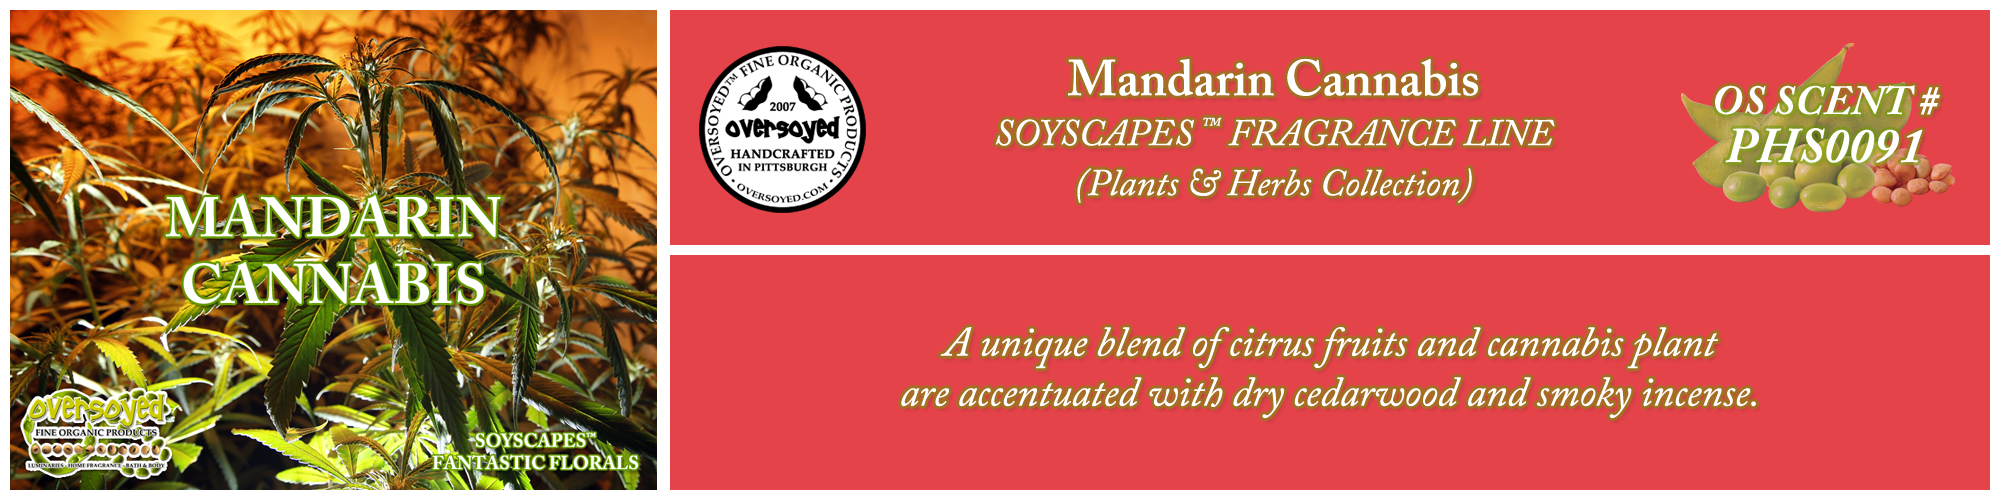 Mandarin Cannabis Handcrafted Products Collection